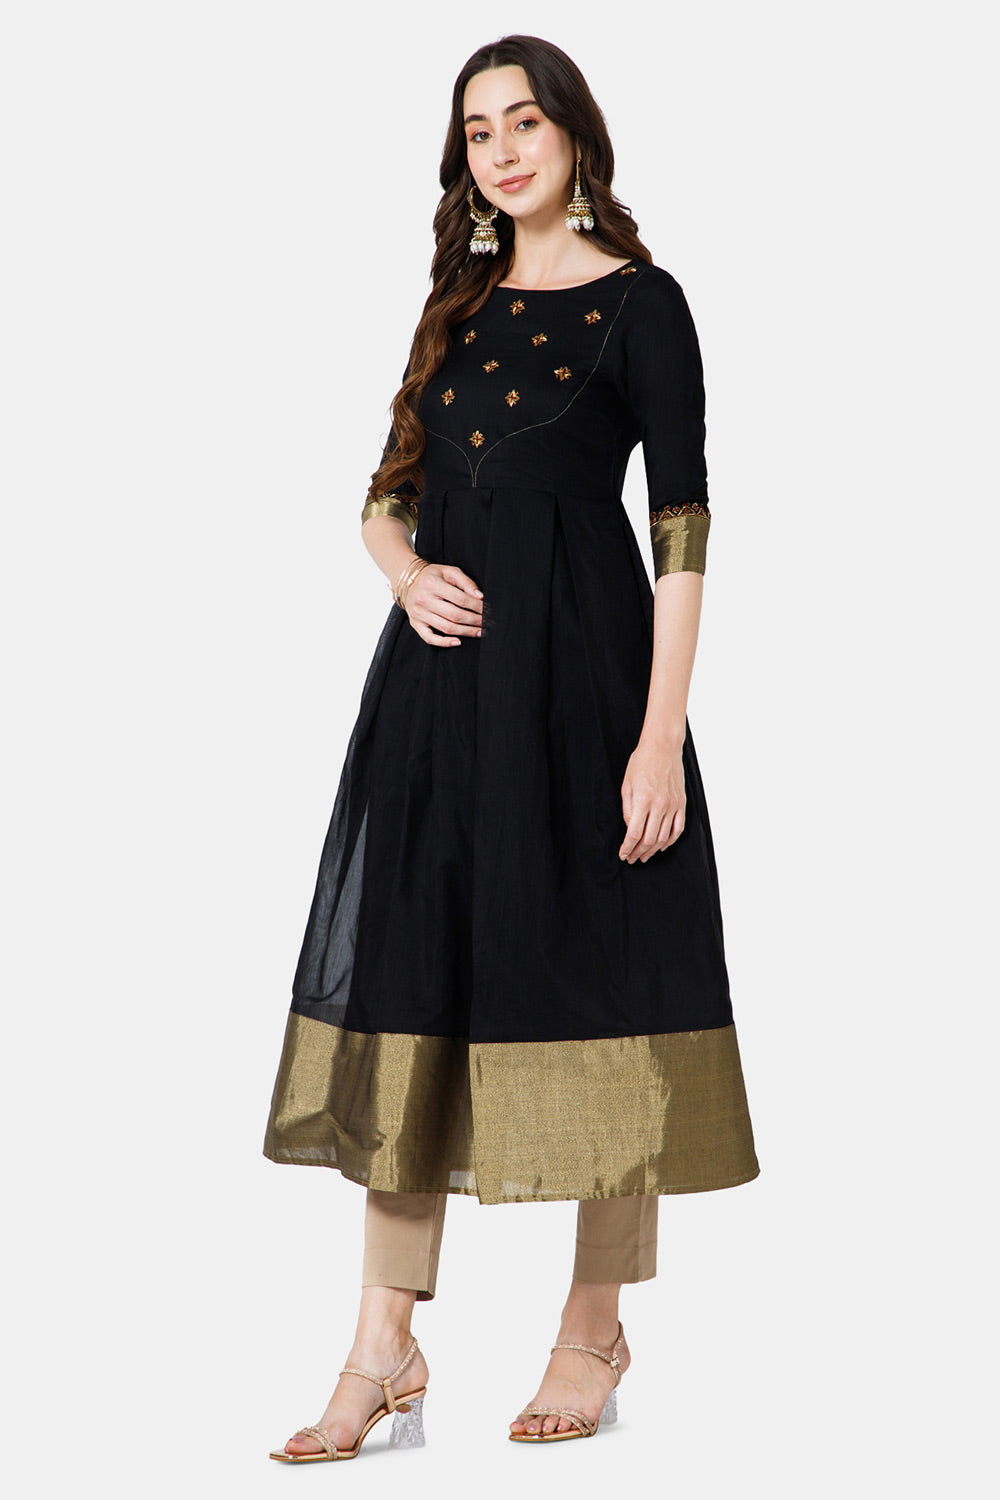 Plain Black Anarkali Flaired Suit with Floral Embroidery and Mirrors |  Exotic India Art